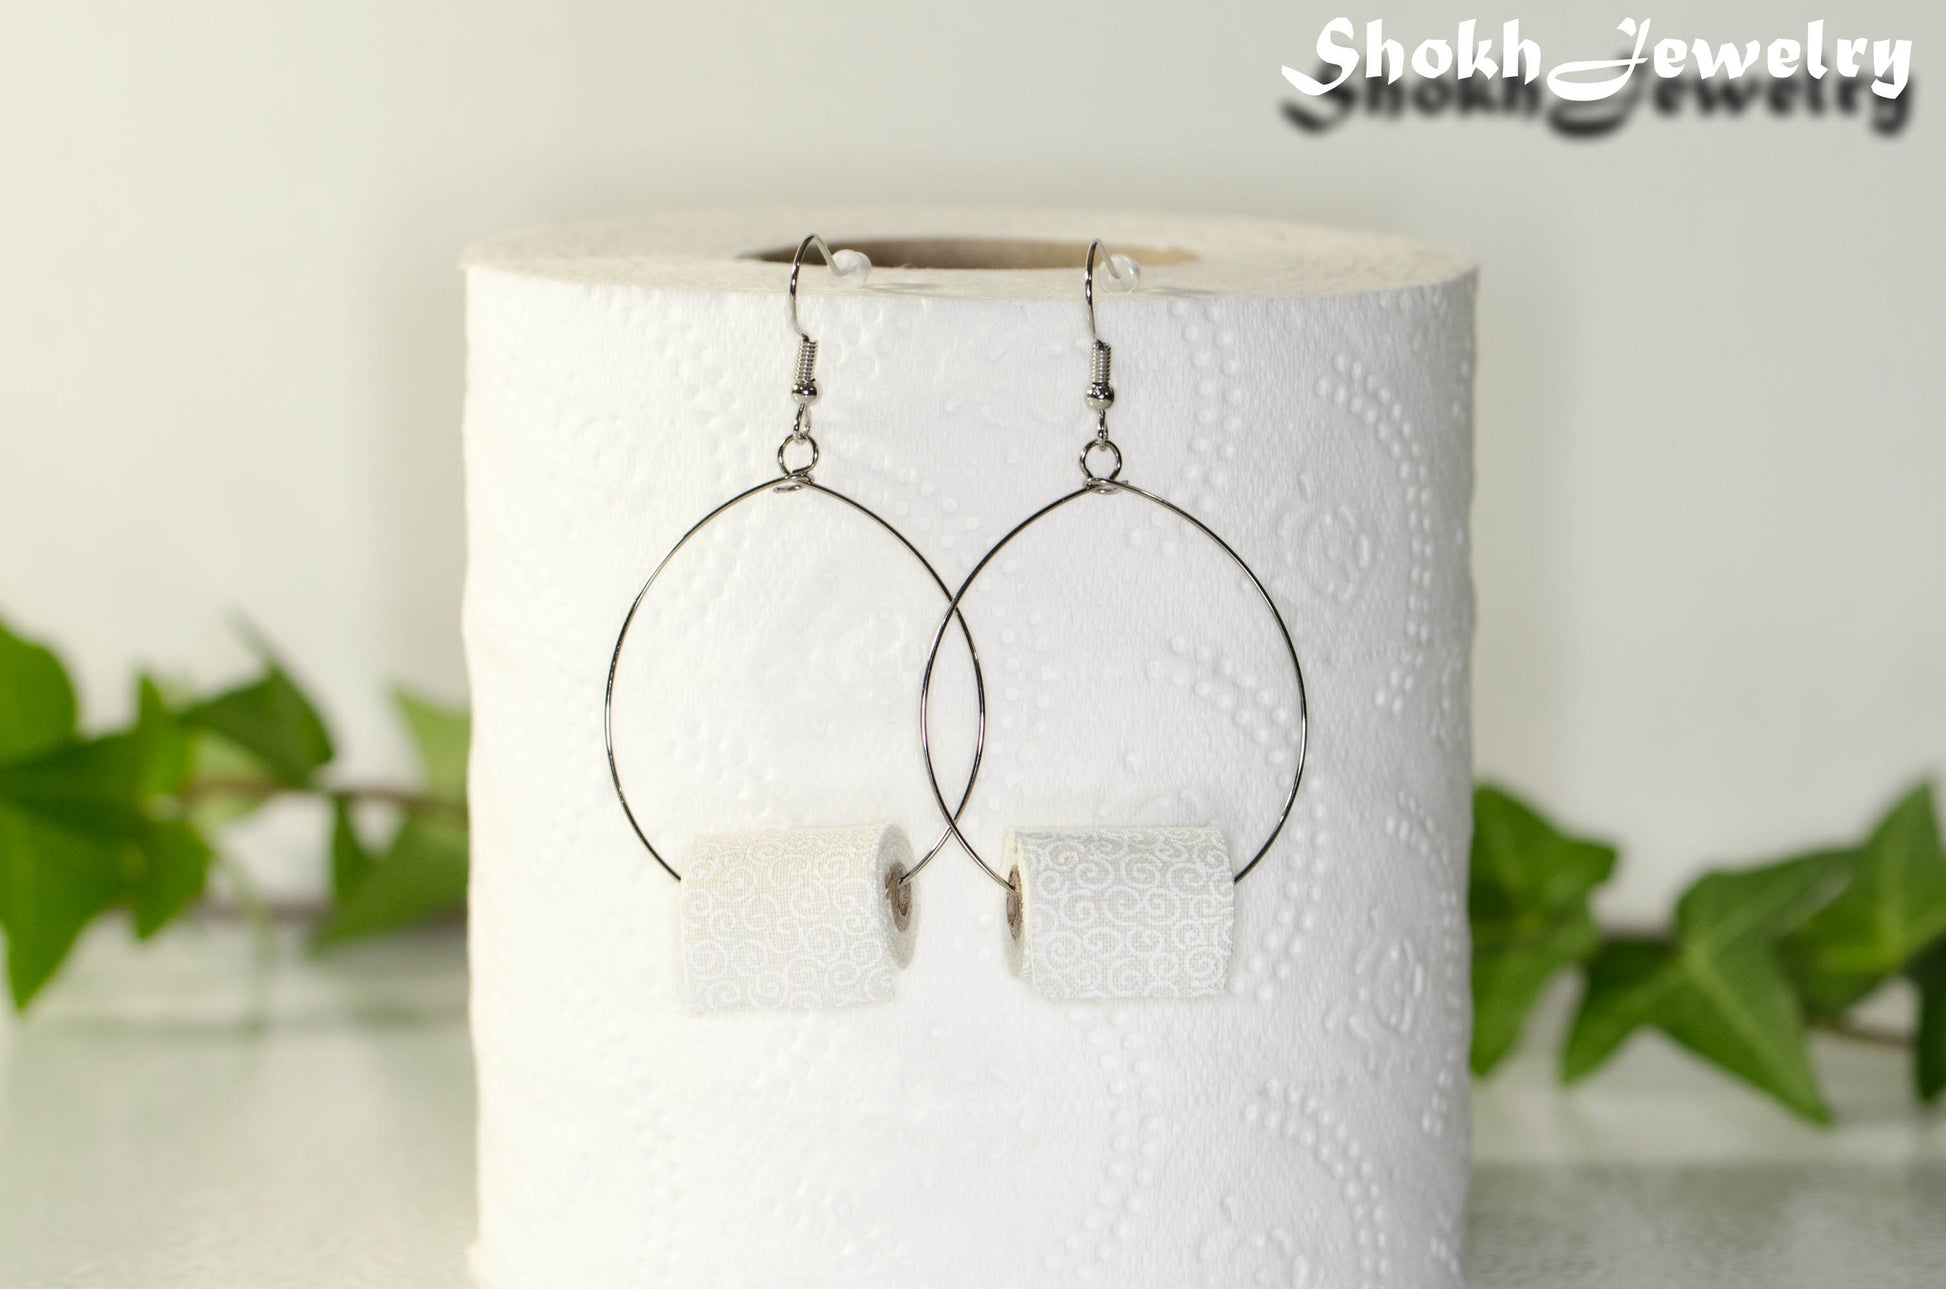 Miniature Toilet Paper Roll Earrings displayed on a toilet paper roll.